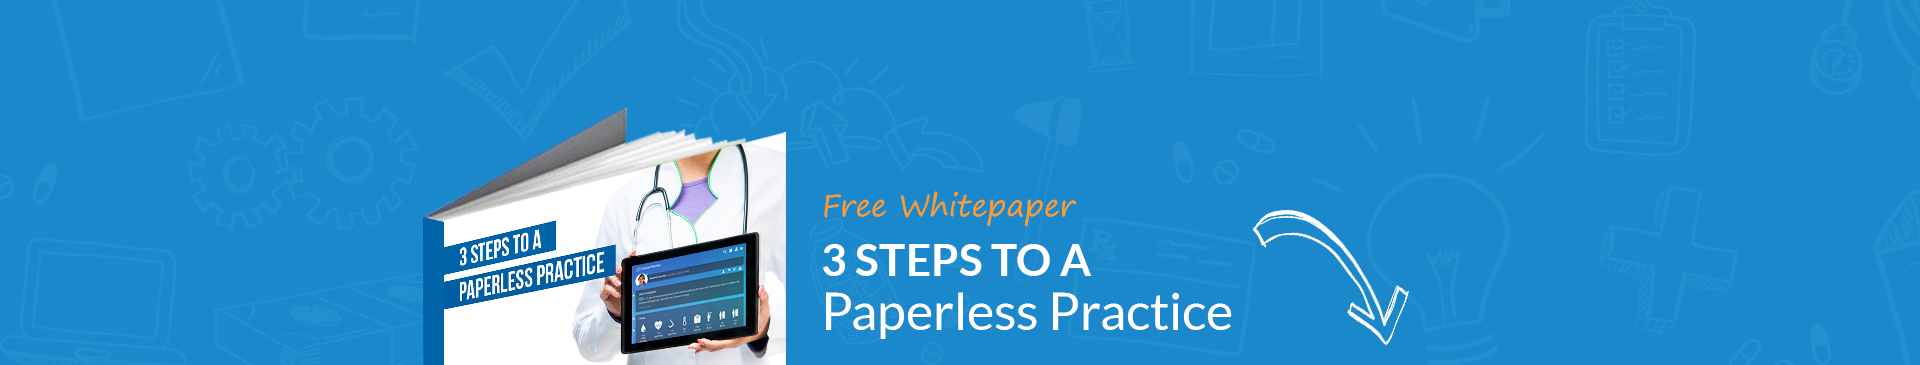 3 steps to a paperless practice